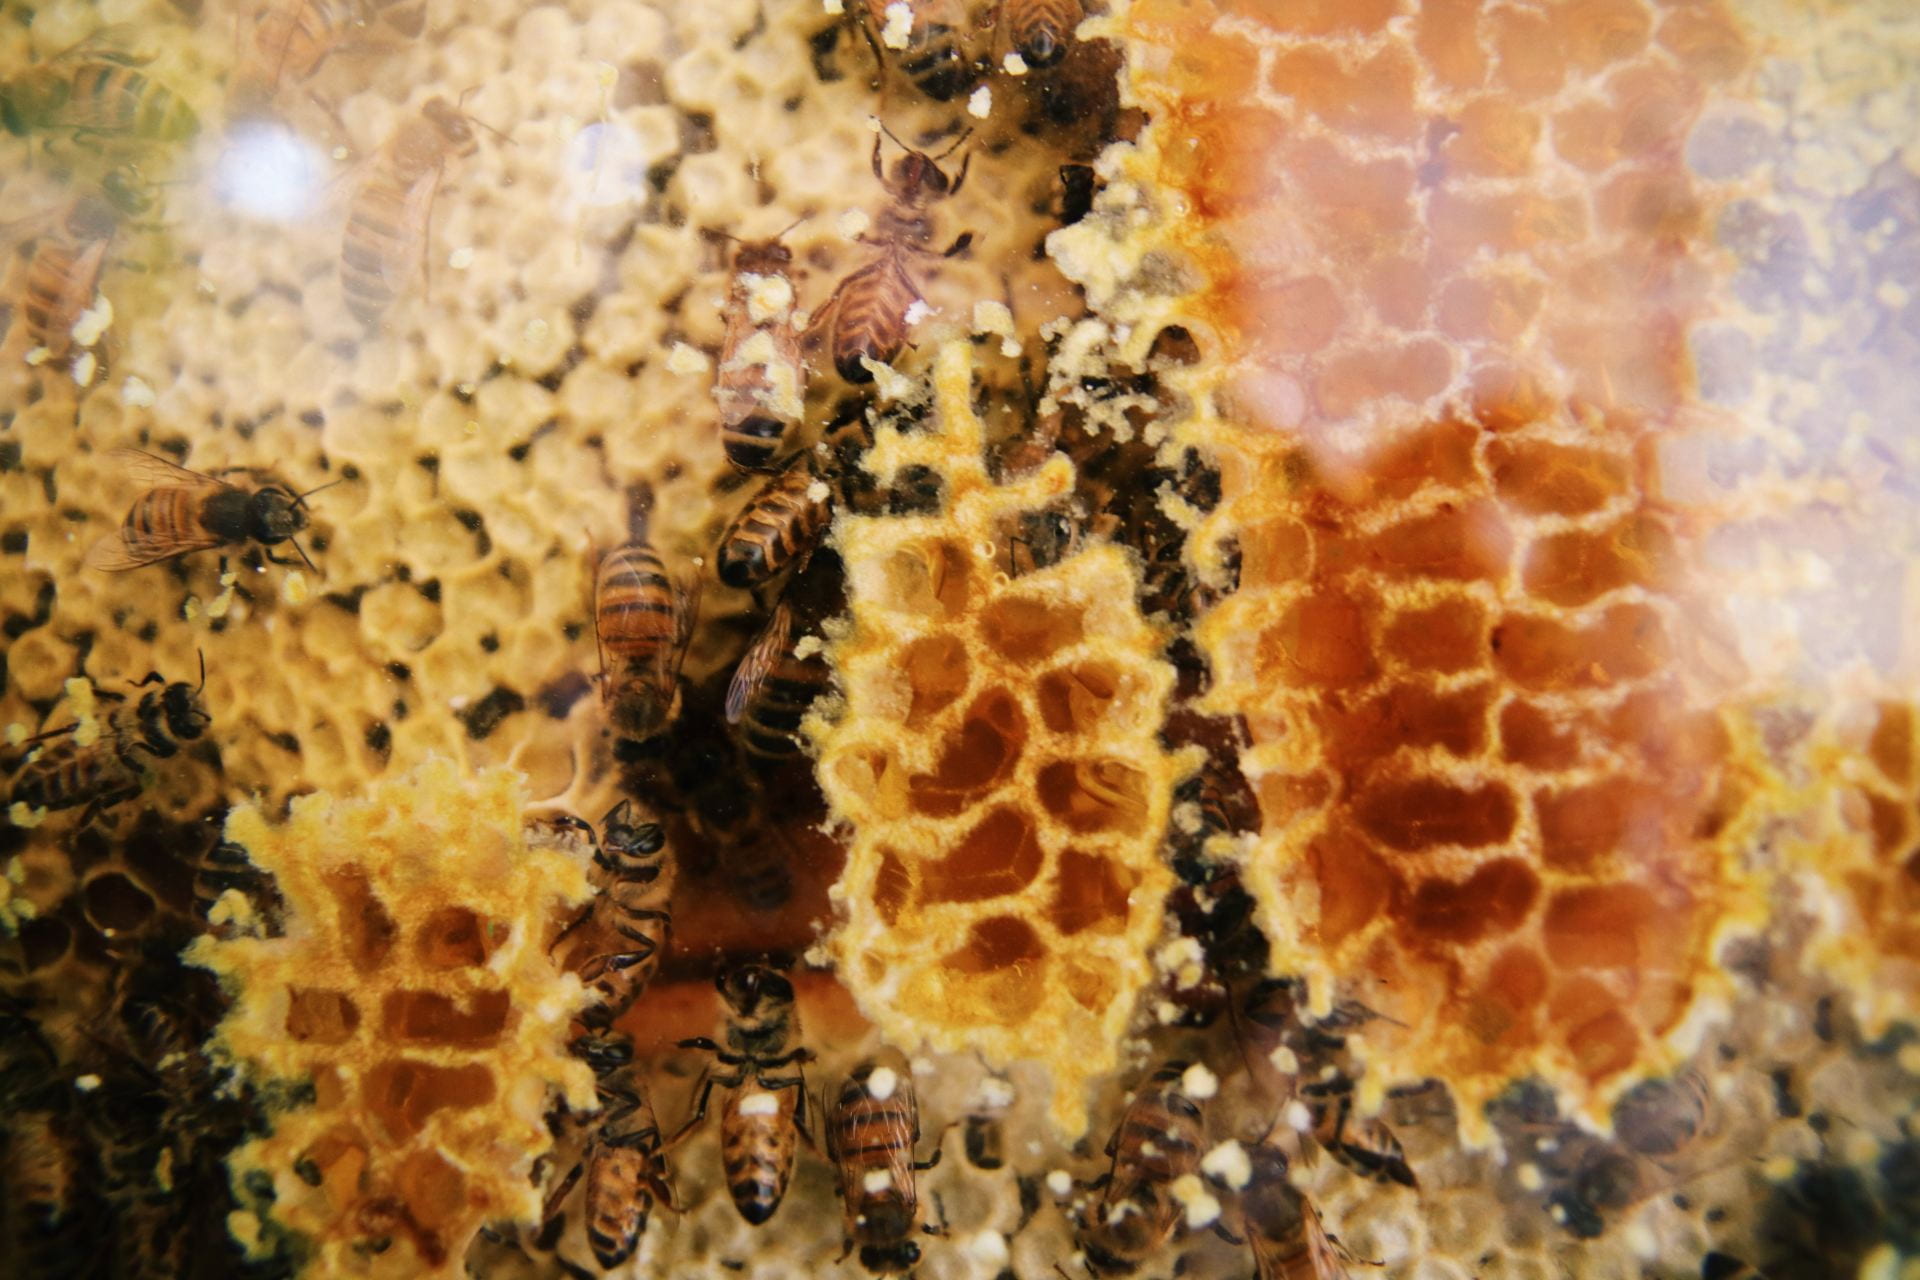 Image of honeycomb of glass, capped honeycomb is in the background and the honey is clearly visible